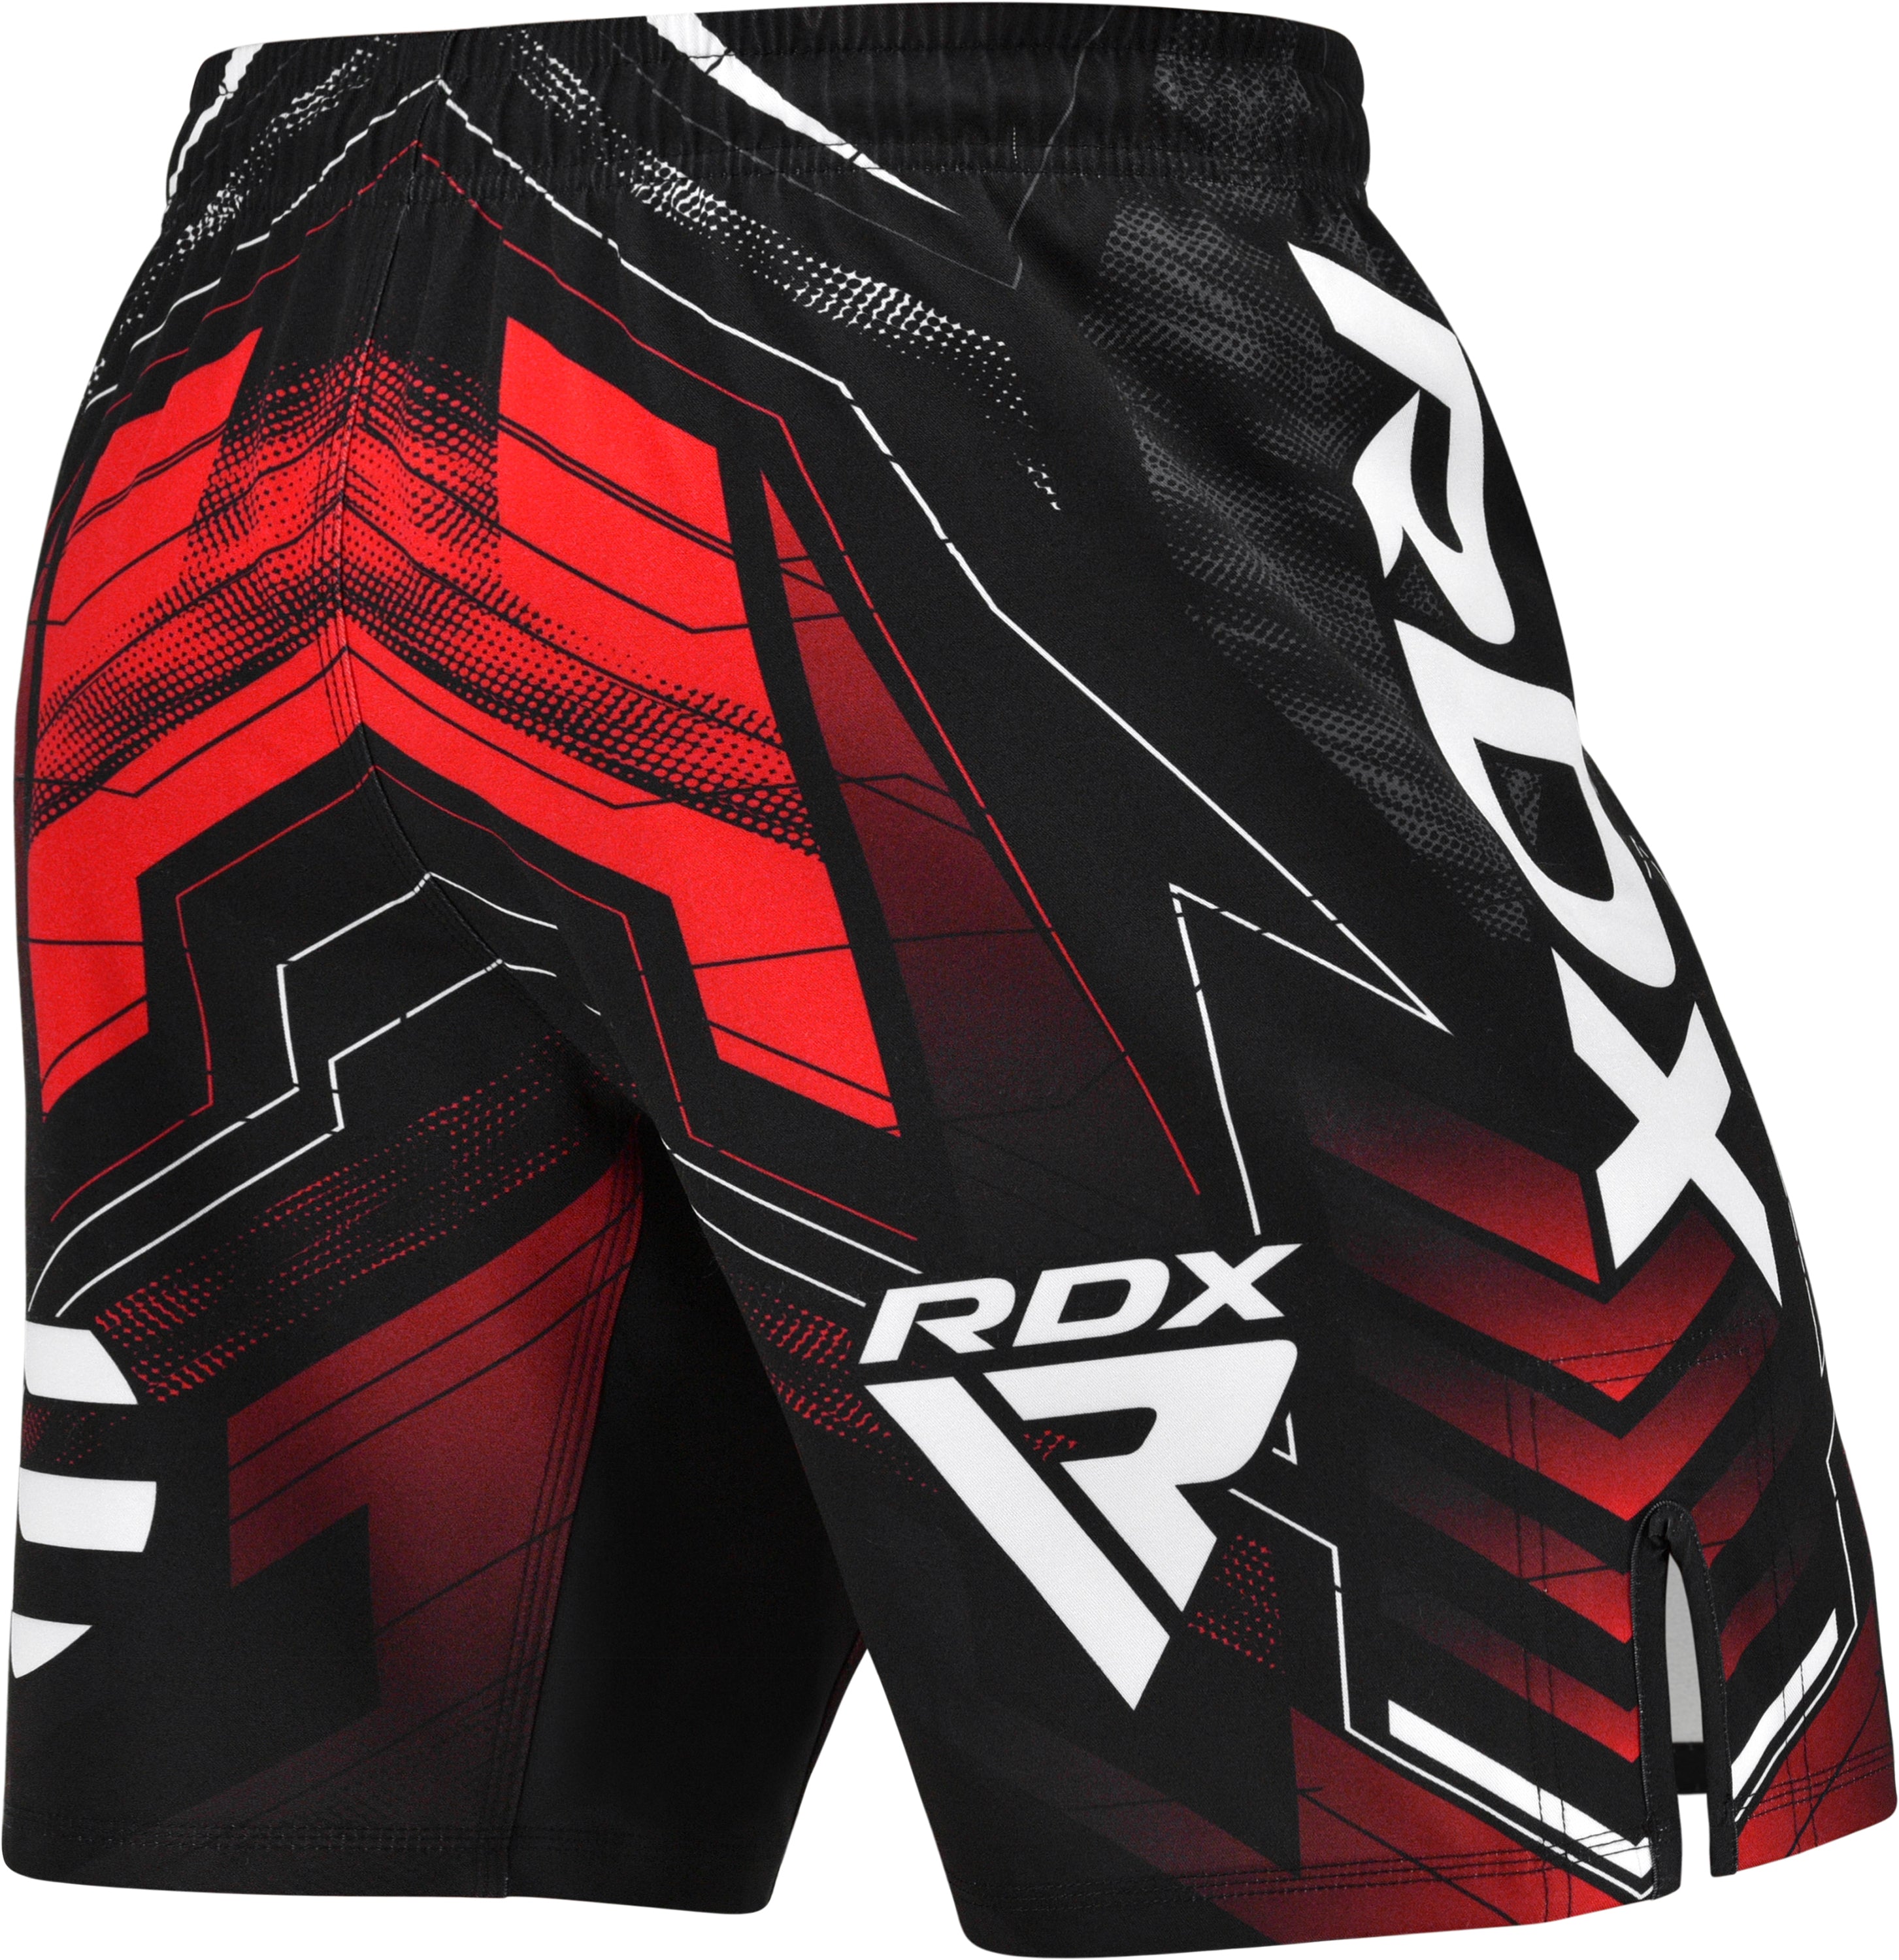 RDX MMA SHORTS IMMAF-1#color_red